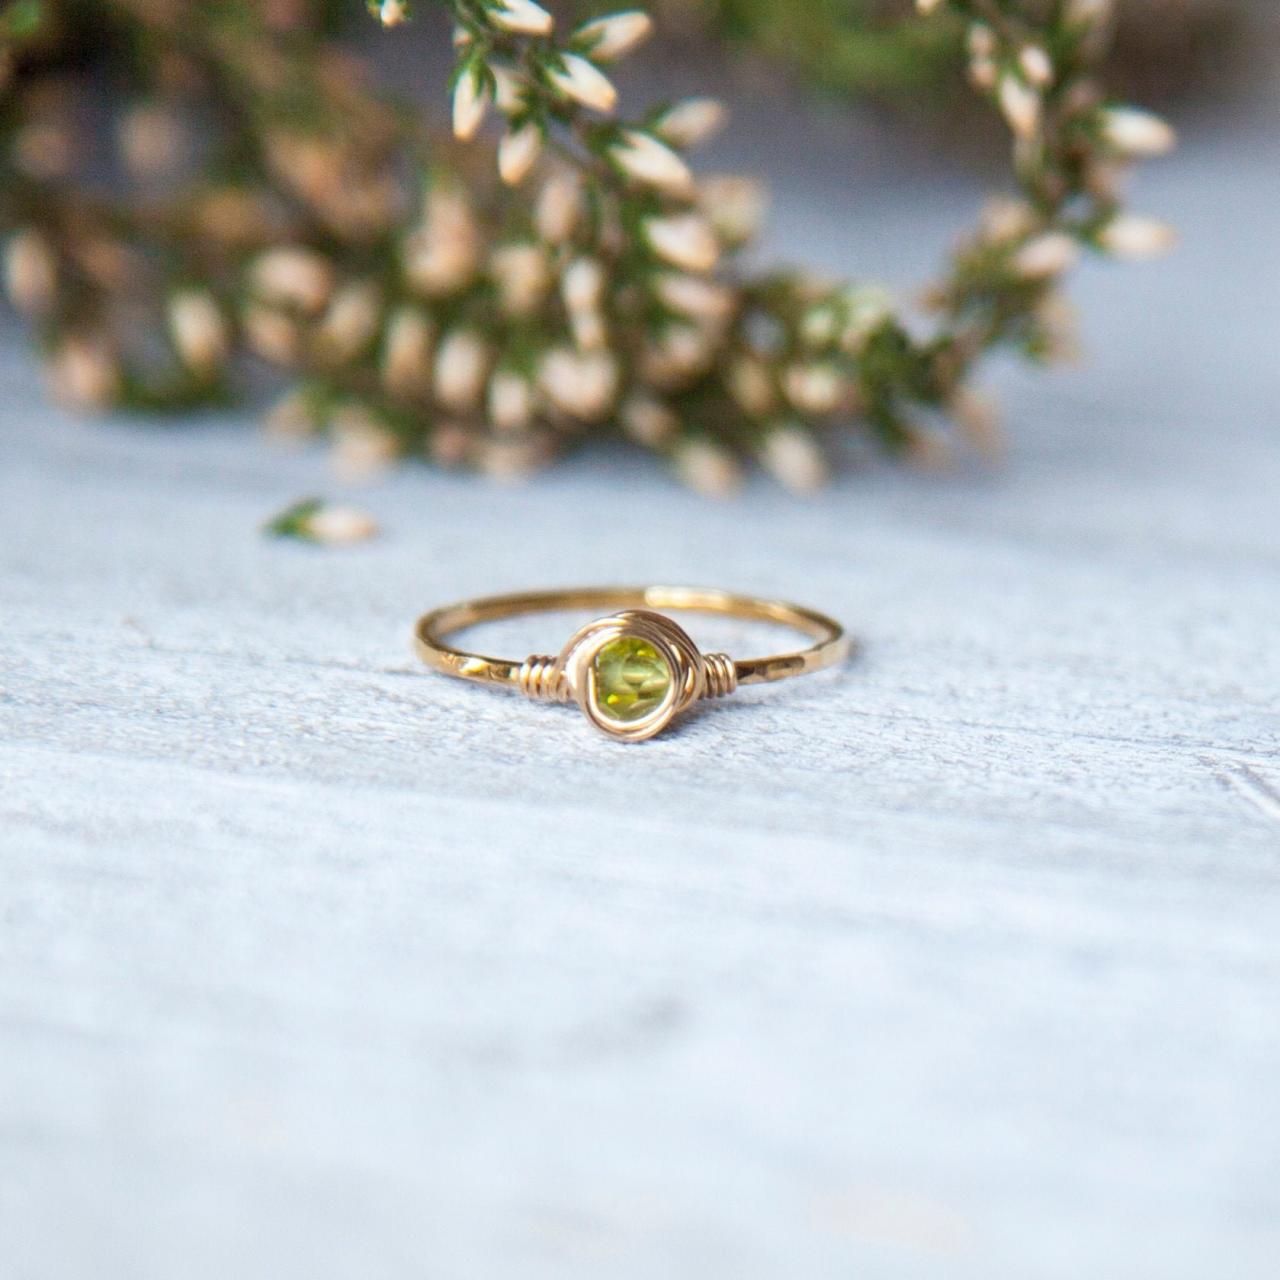 Faceted Peridot Ring, Gold Filled Natural Peridot Ring, August Birthstone Ring, Hammered Ring, Textured Ring, Wire Wrapped Gold Ring